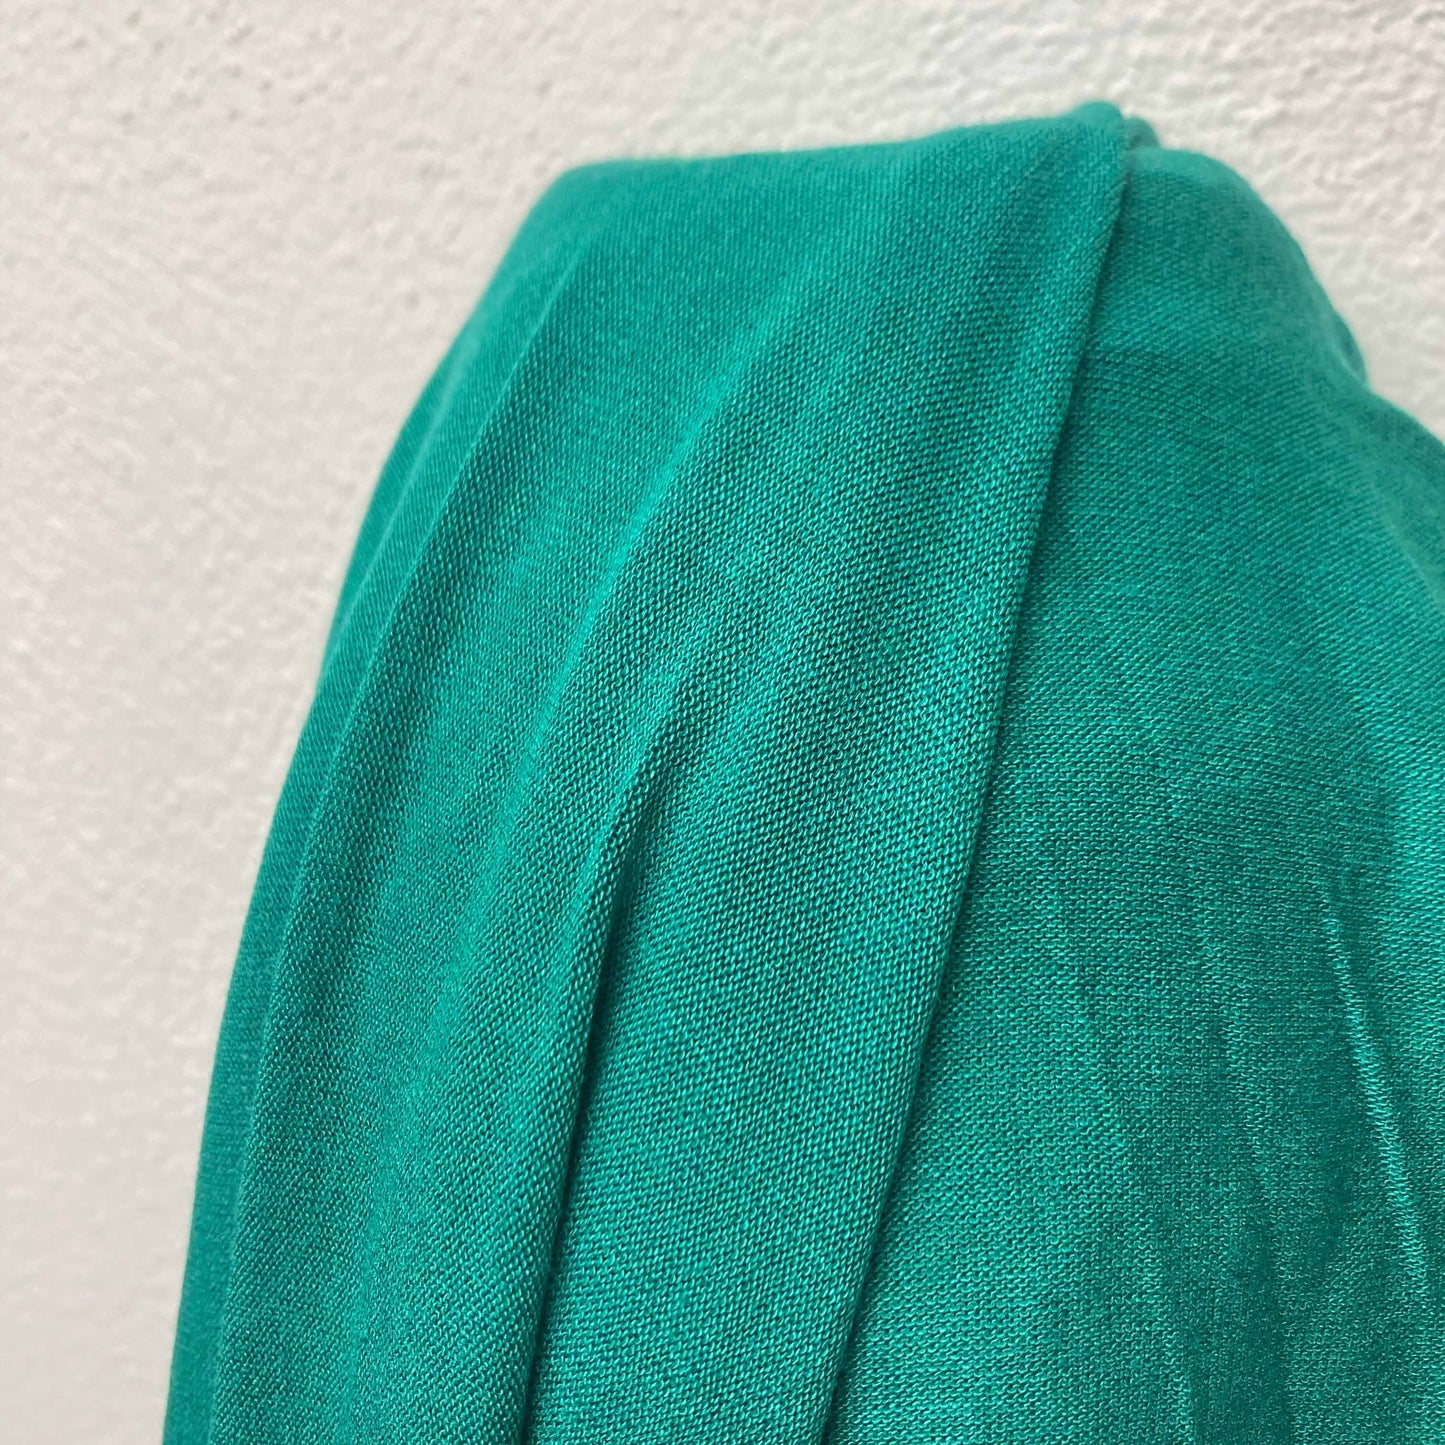 Jersey Fabric - Turquoise